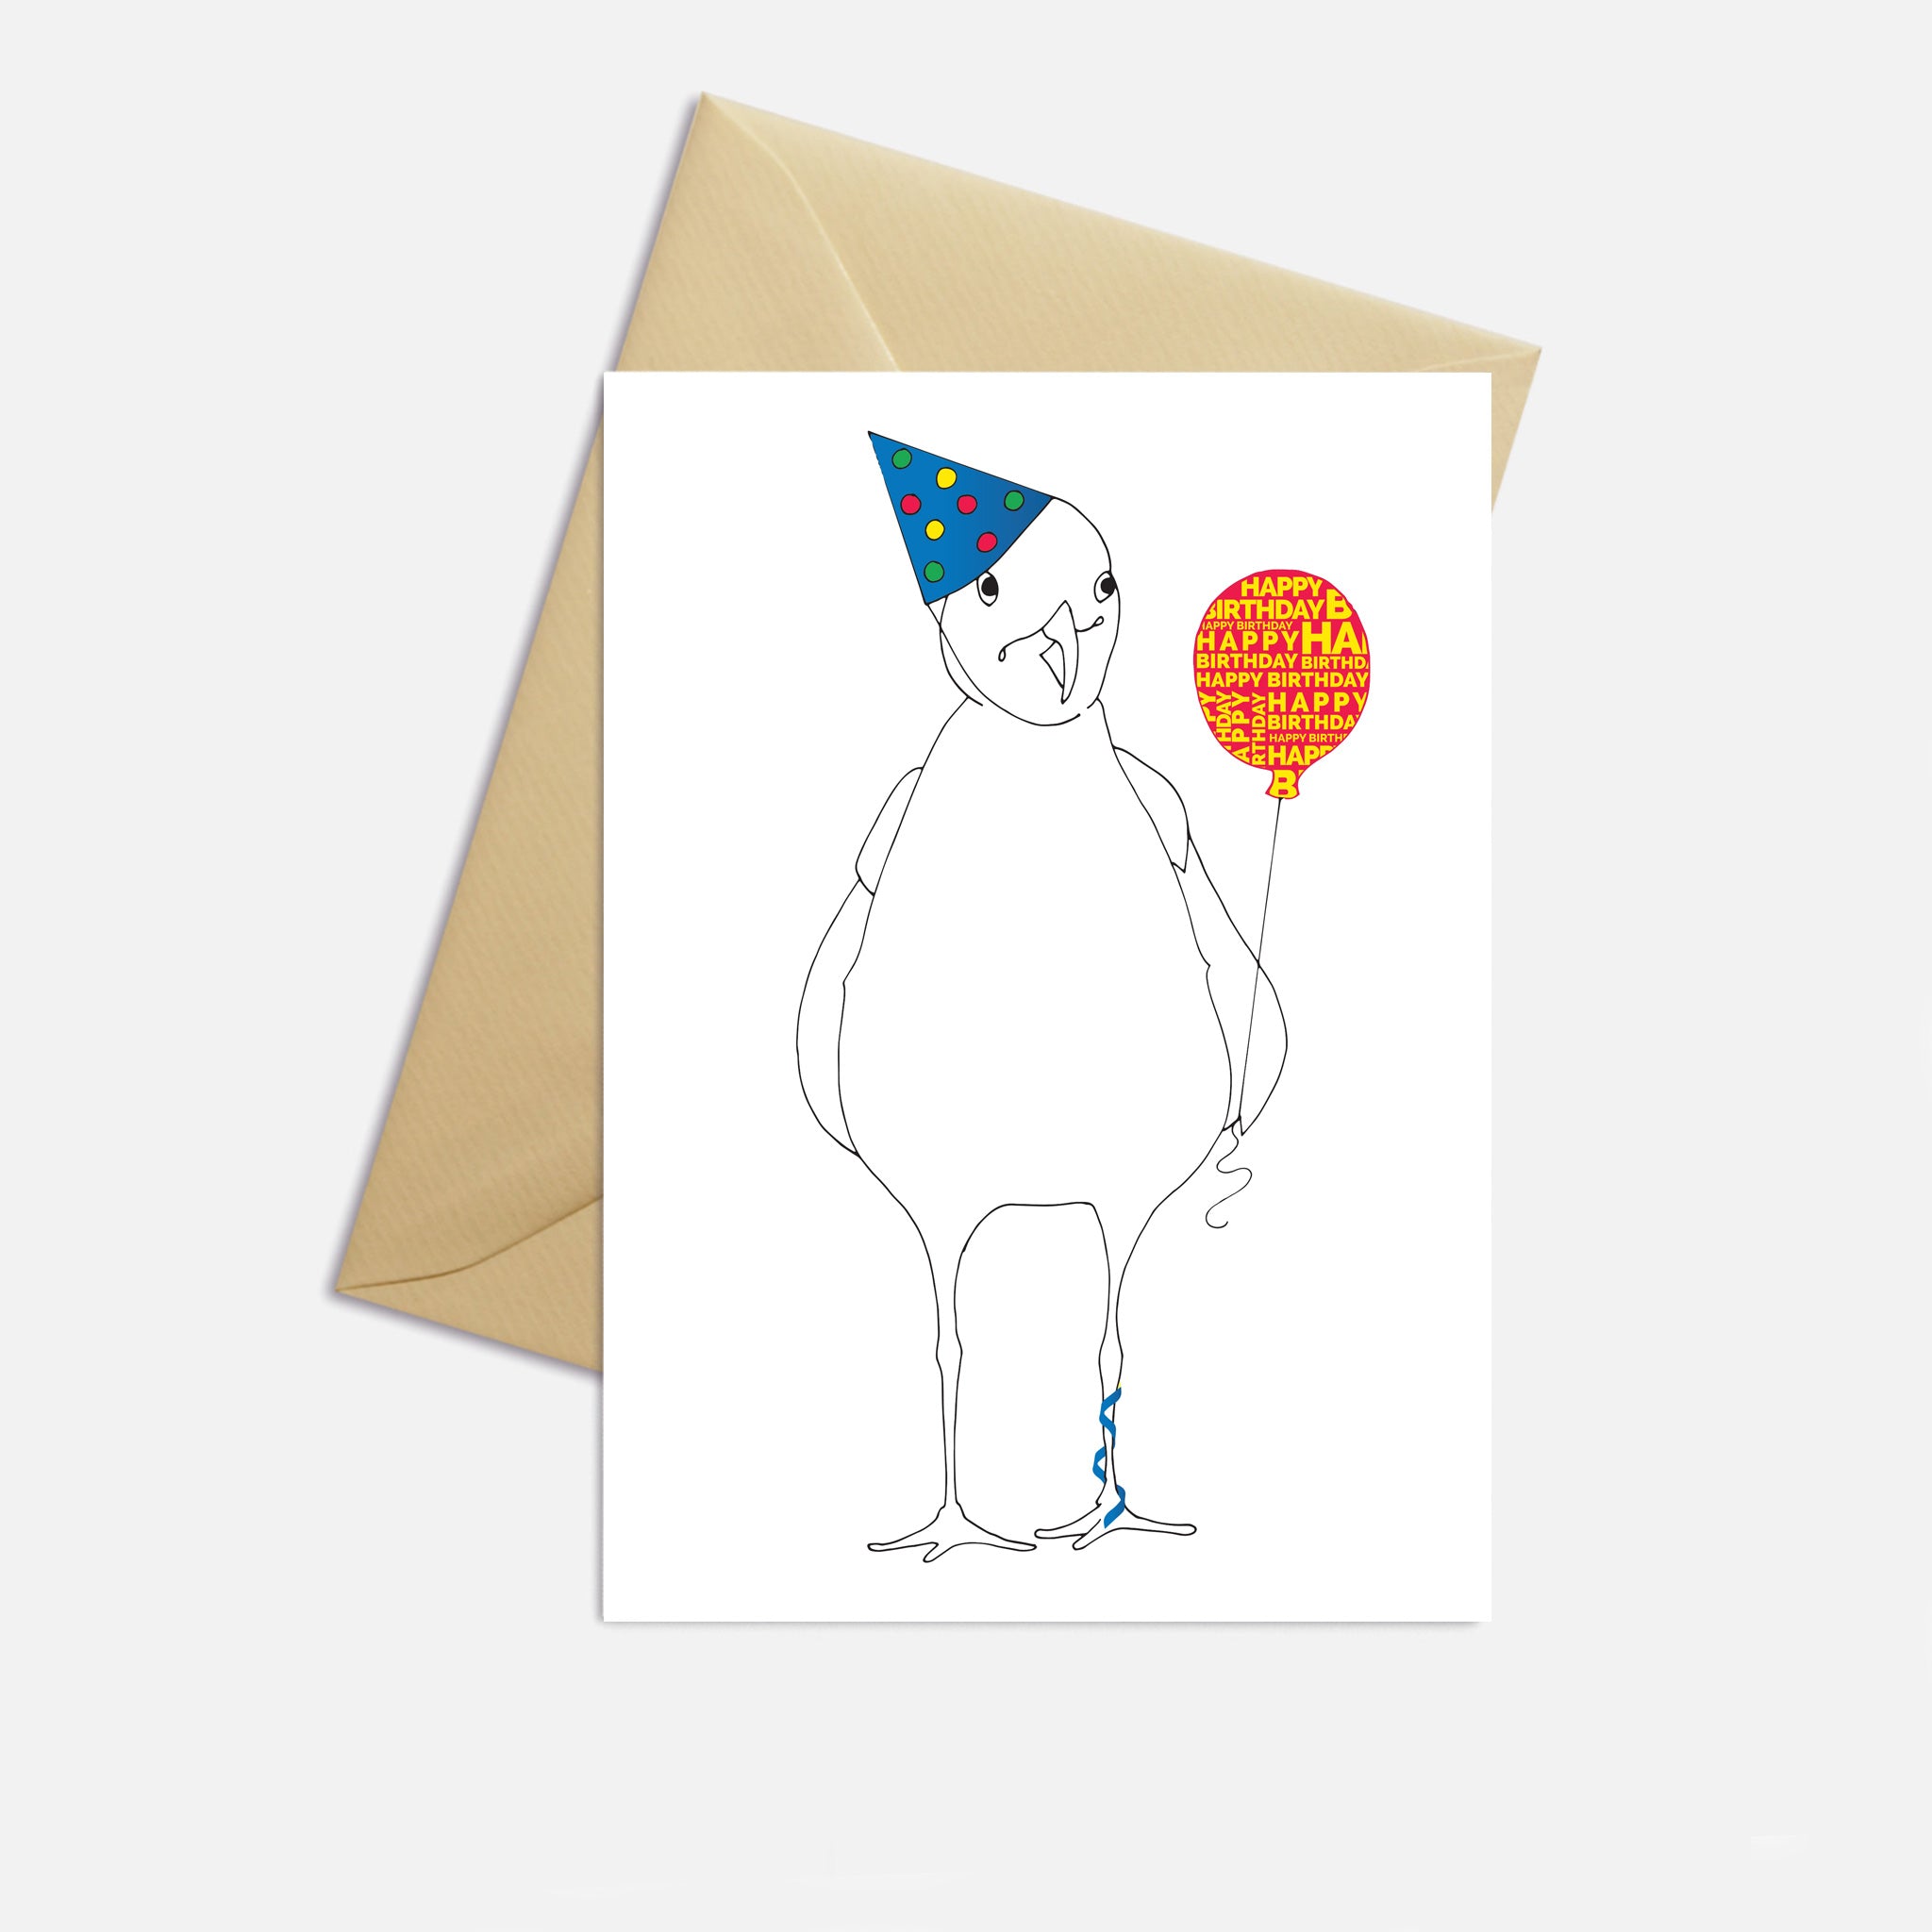 Harry's Birthday Party Greeting Card